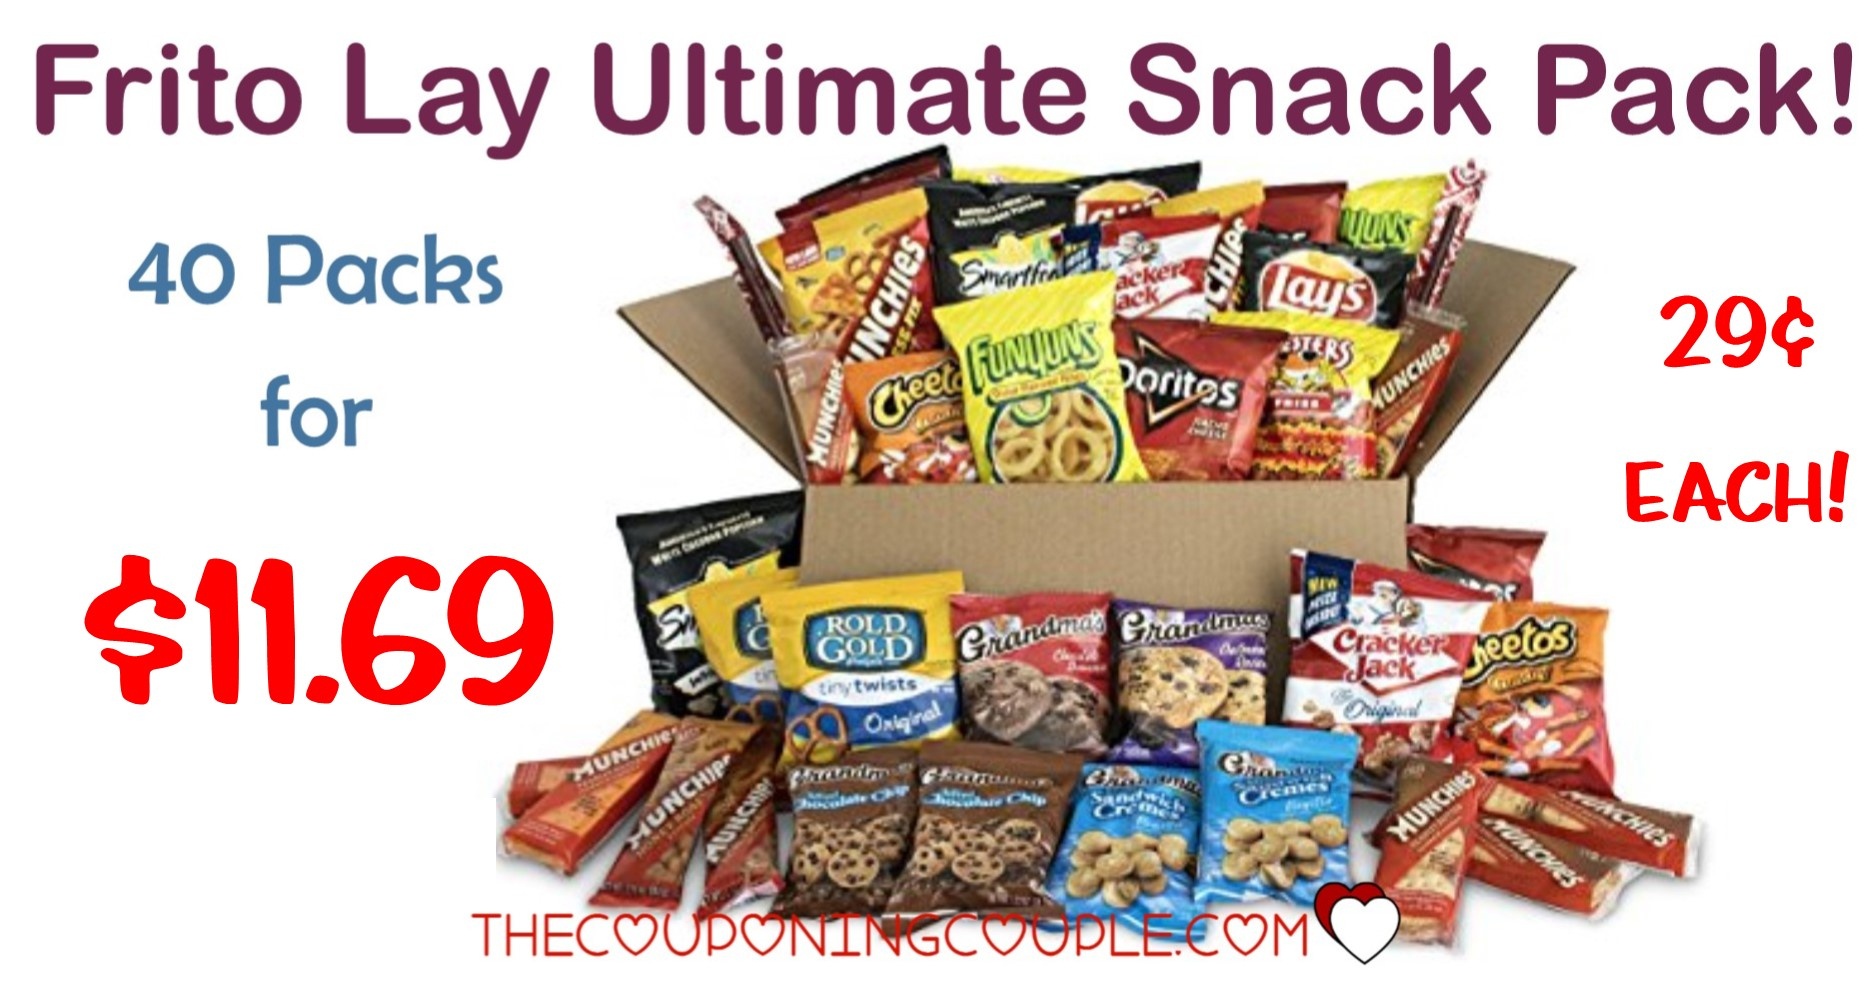 Frito Lay Ultimate Snack Pack, 40 Count = $11.69! $0.29 Each! - Free Printable Frito Lay Coupons